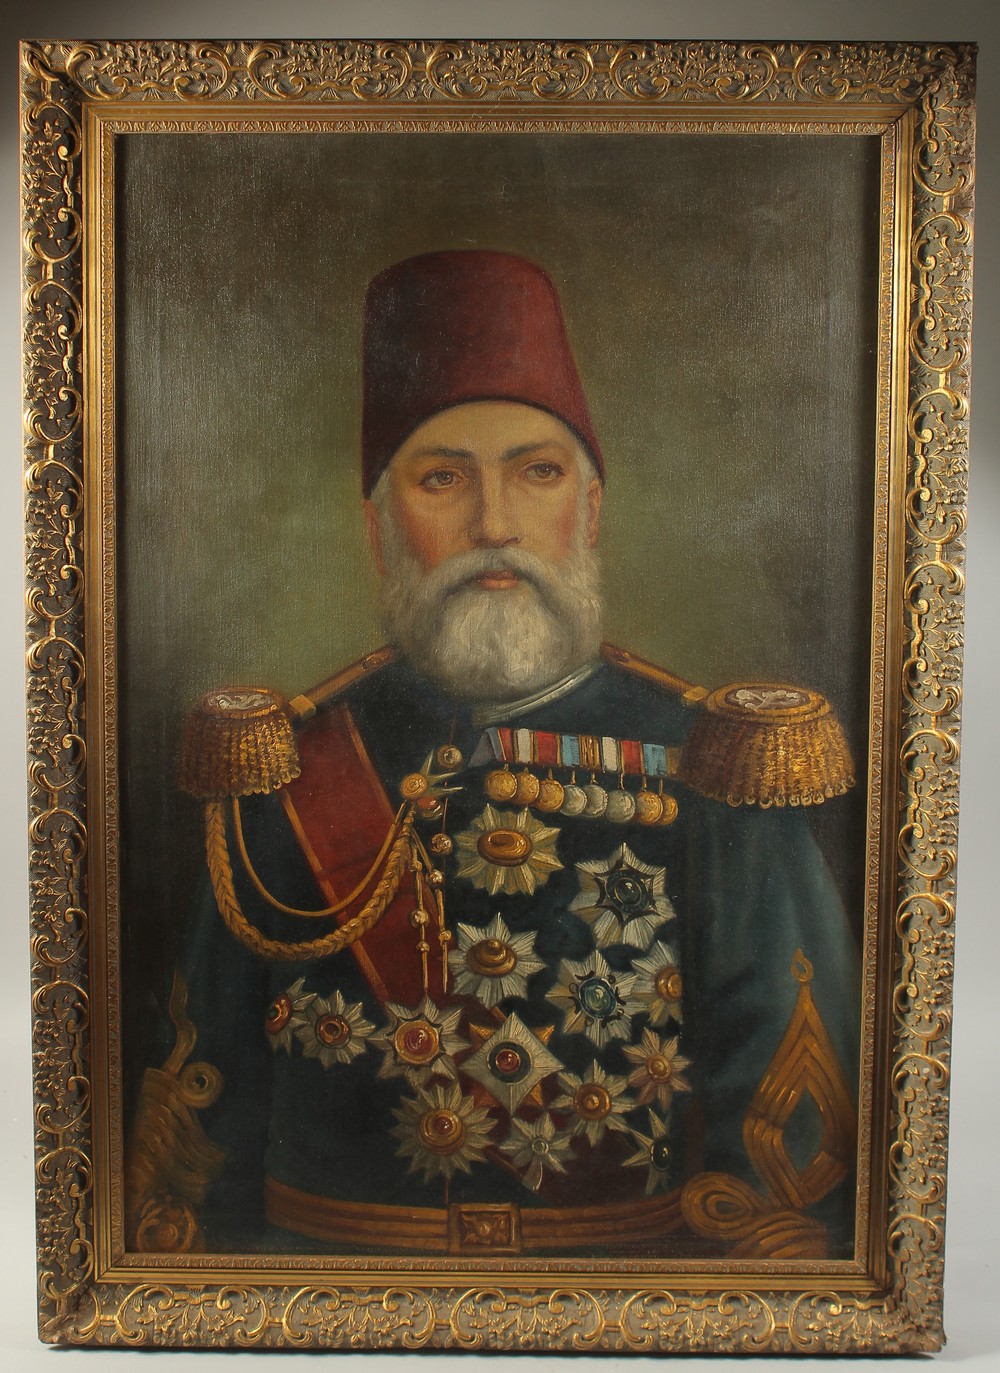 A LARGE OTTOMAN TURKISH PORTRAIT PAINTING OF MEHMED V RESAD: SULTAN OF THE OTTOMAN EMPIRE FROM